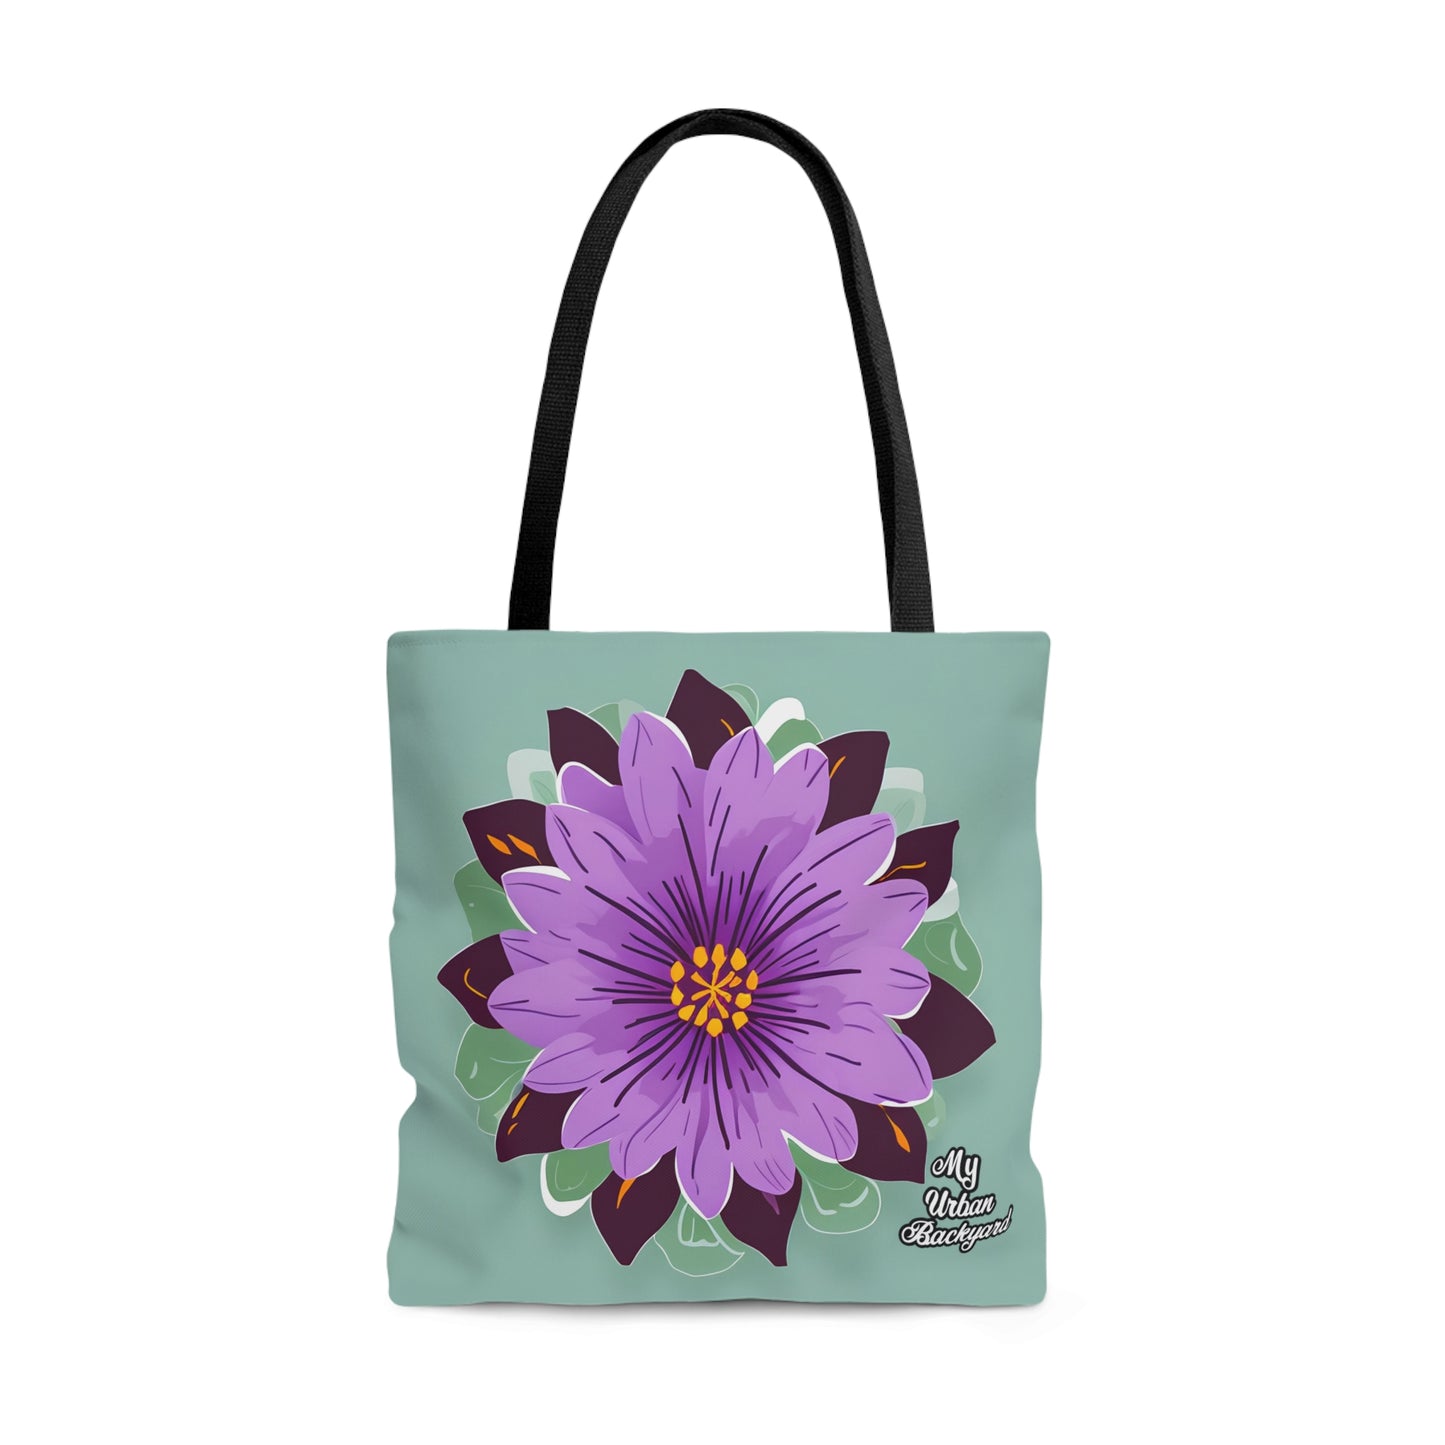 Purple Flower, Tote Bag for Everyday Use - Durable and Functional